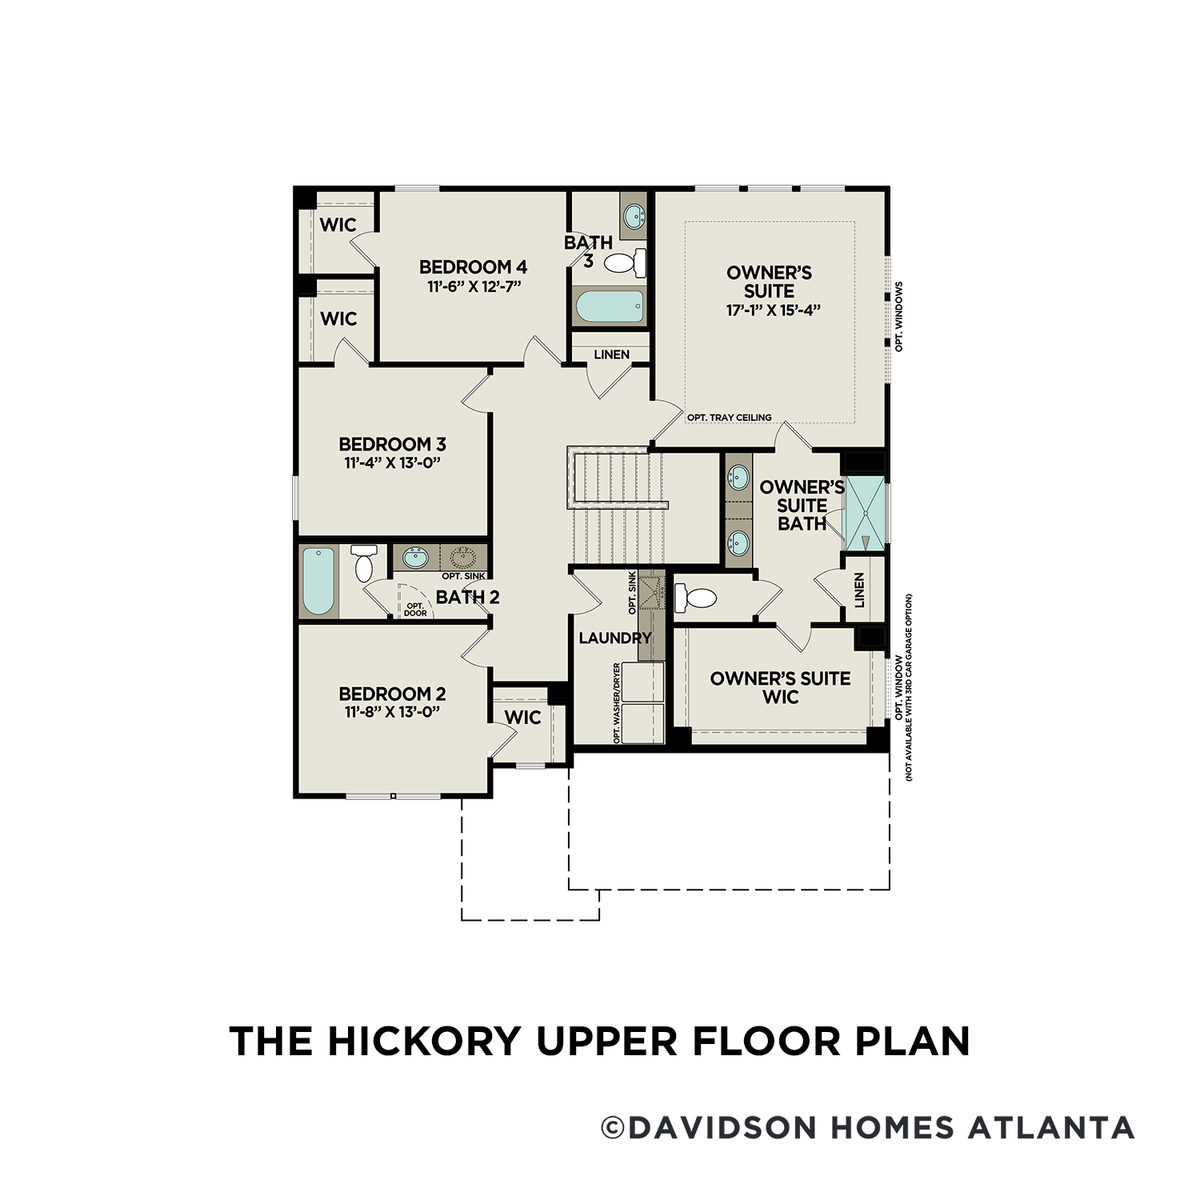 2 - The Hickory A buildable floor plan layout in Davidson Homes' Riverwood community.